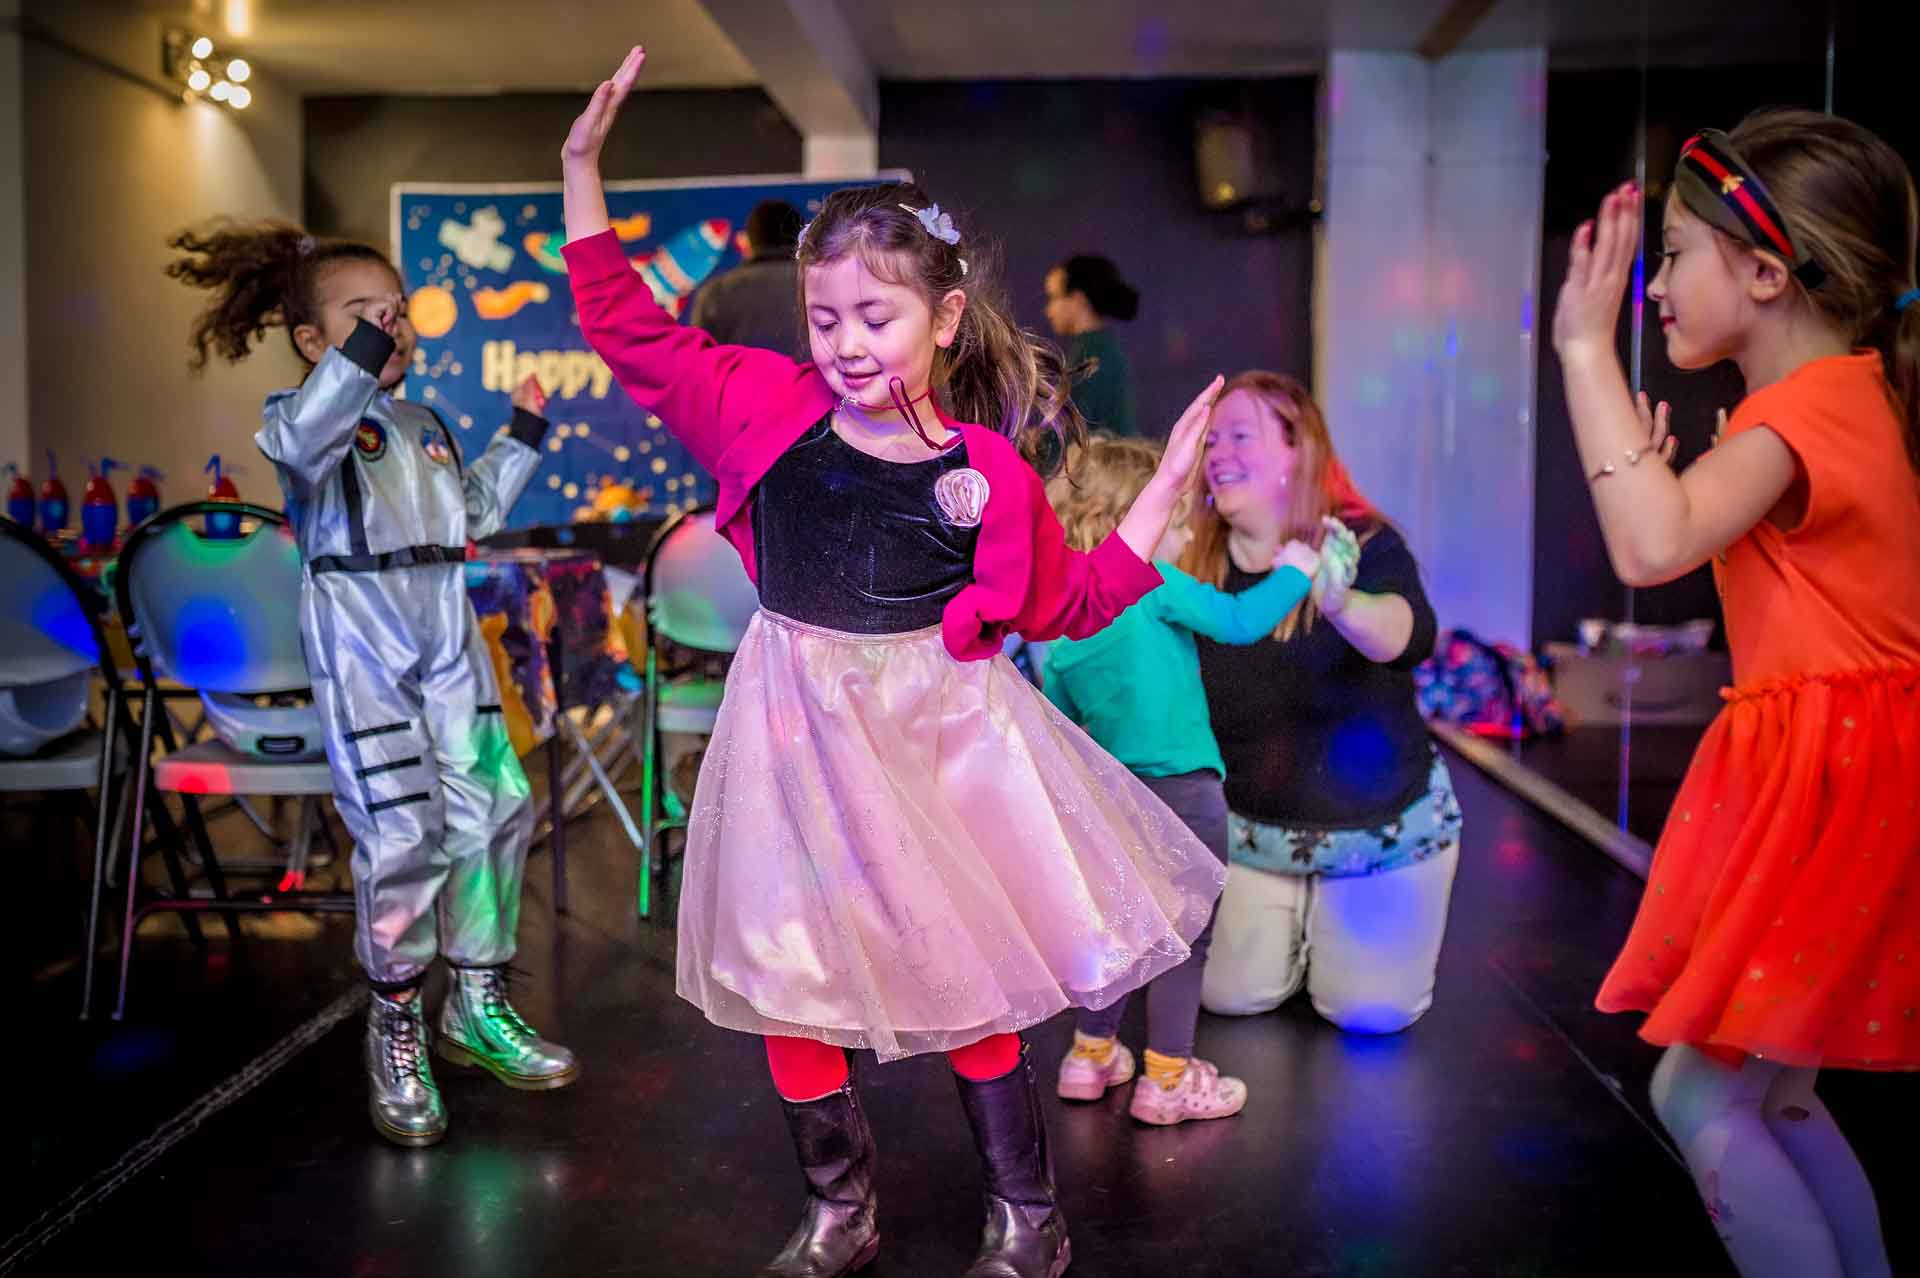 At a birthday party, children dance on dancefloor with arms in the air